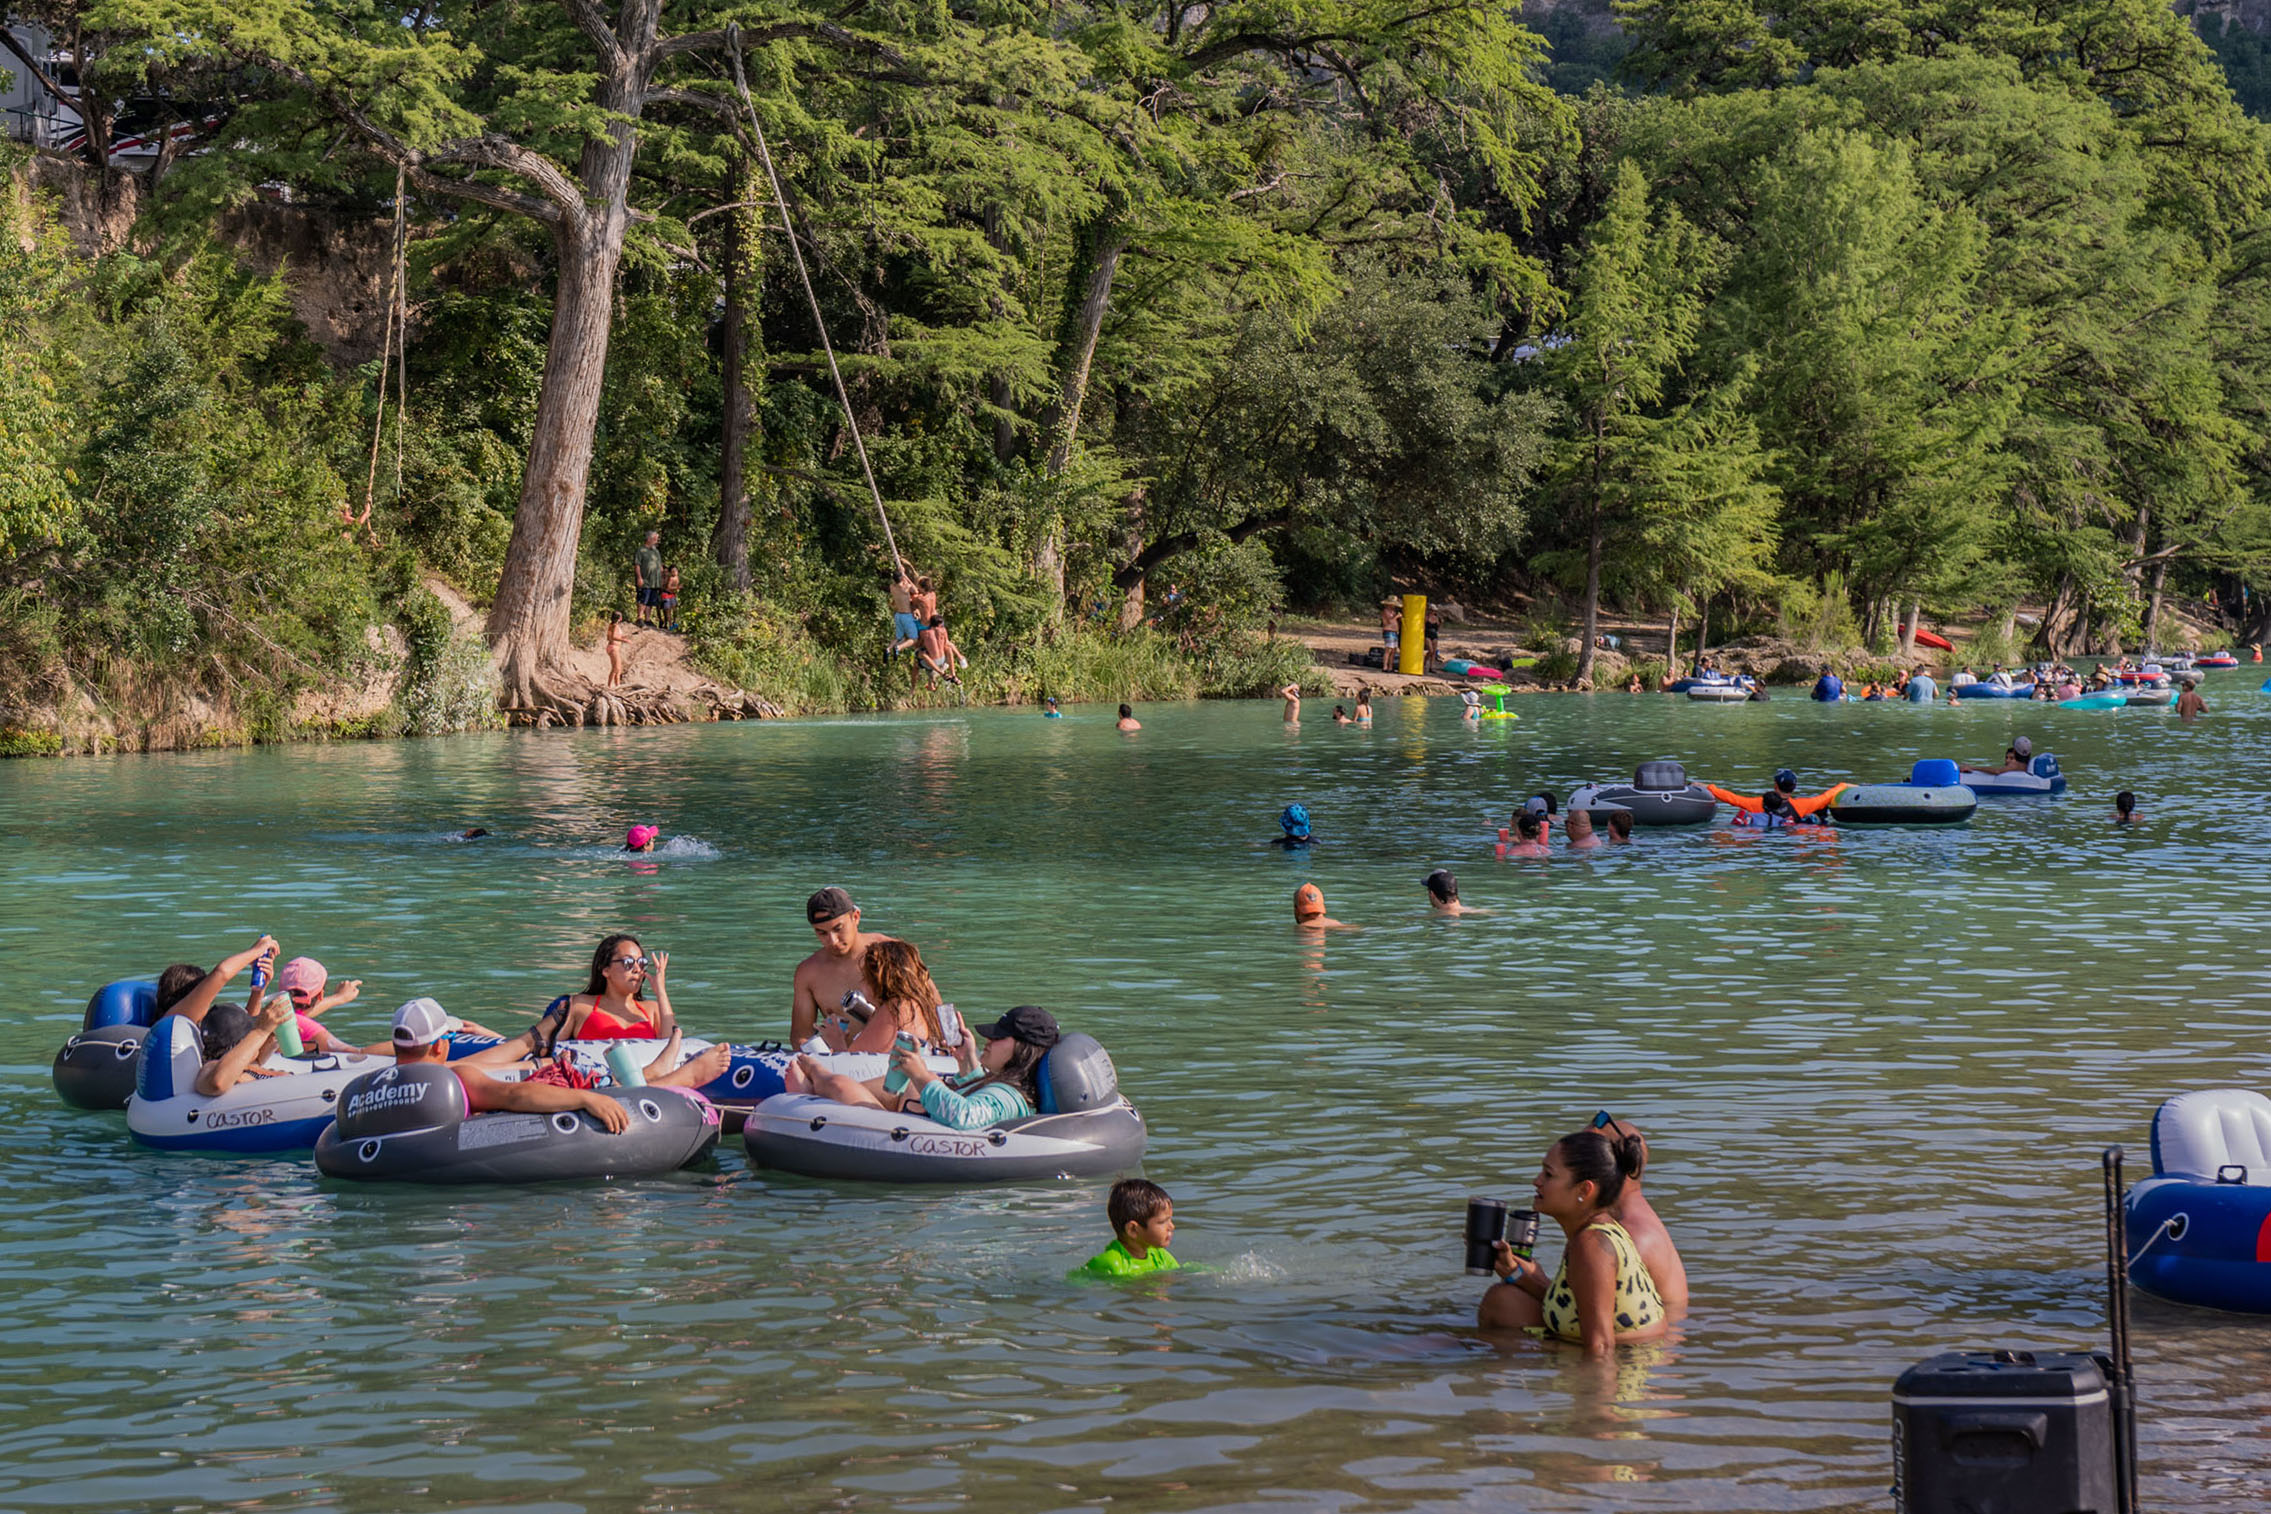 Large groups of people float, wade, and swing into the Frio river in Garner State Park